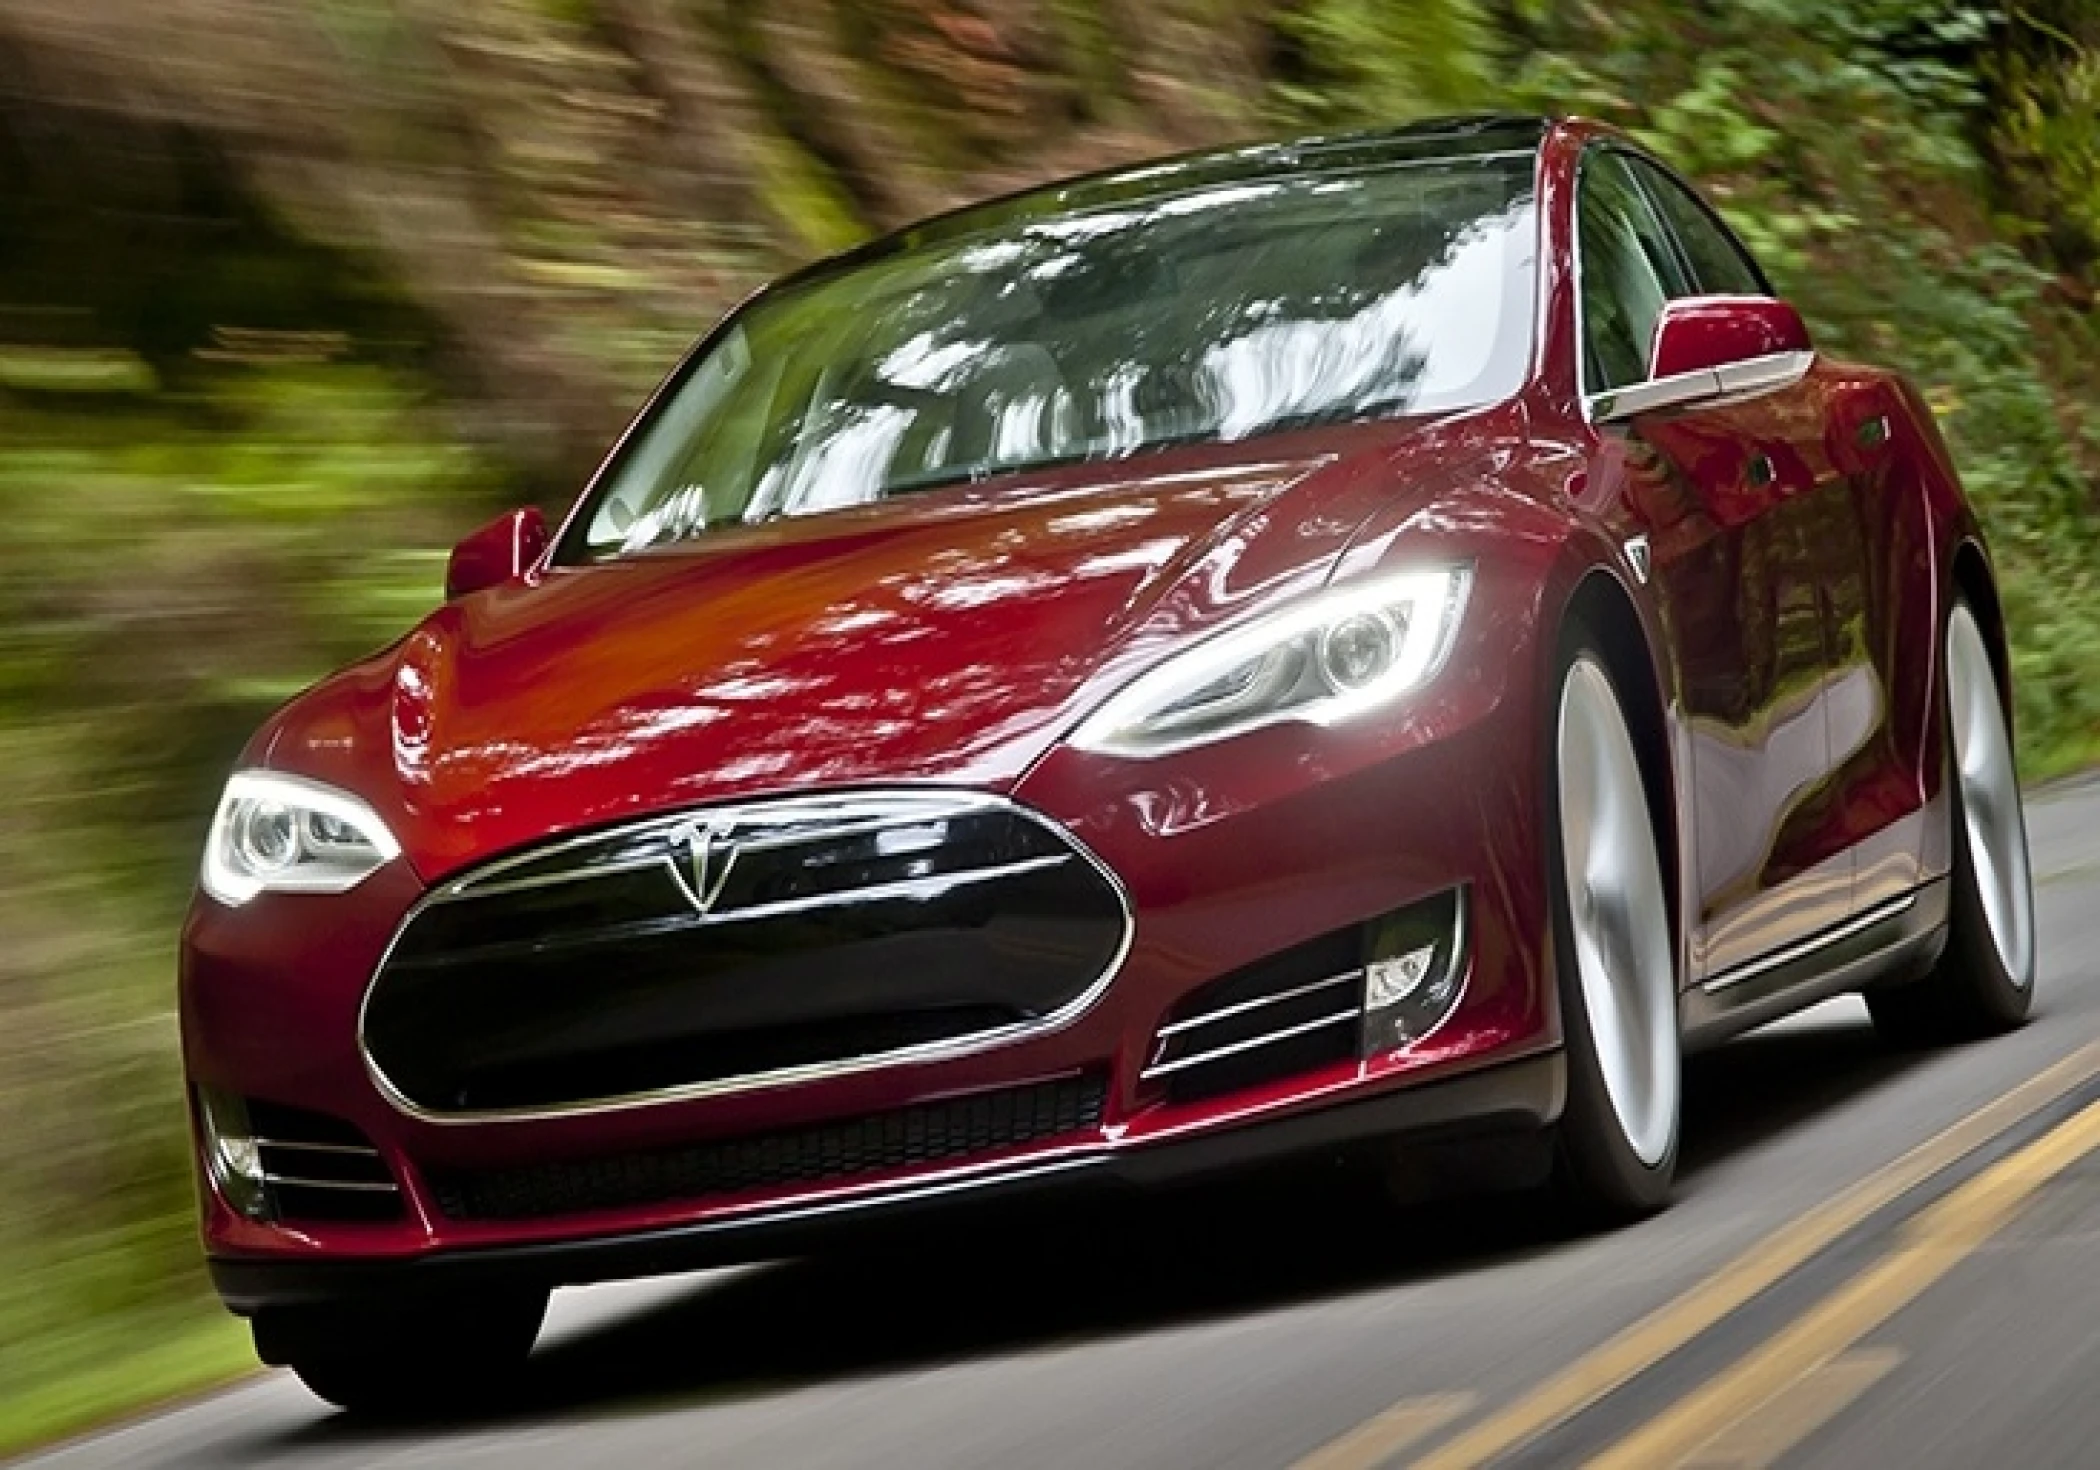 Tesla's Sales Hit a Speed Bump: Competition Heats Up, Growth Slows